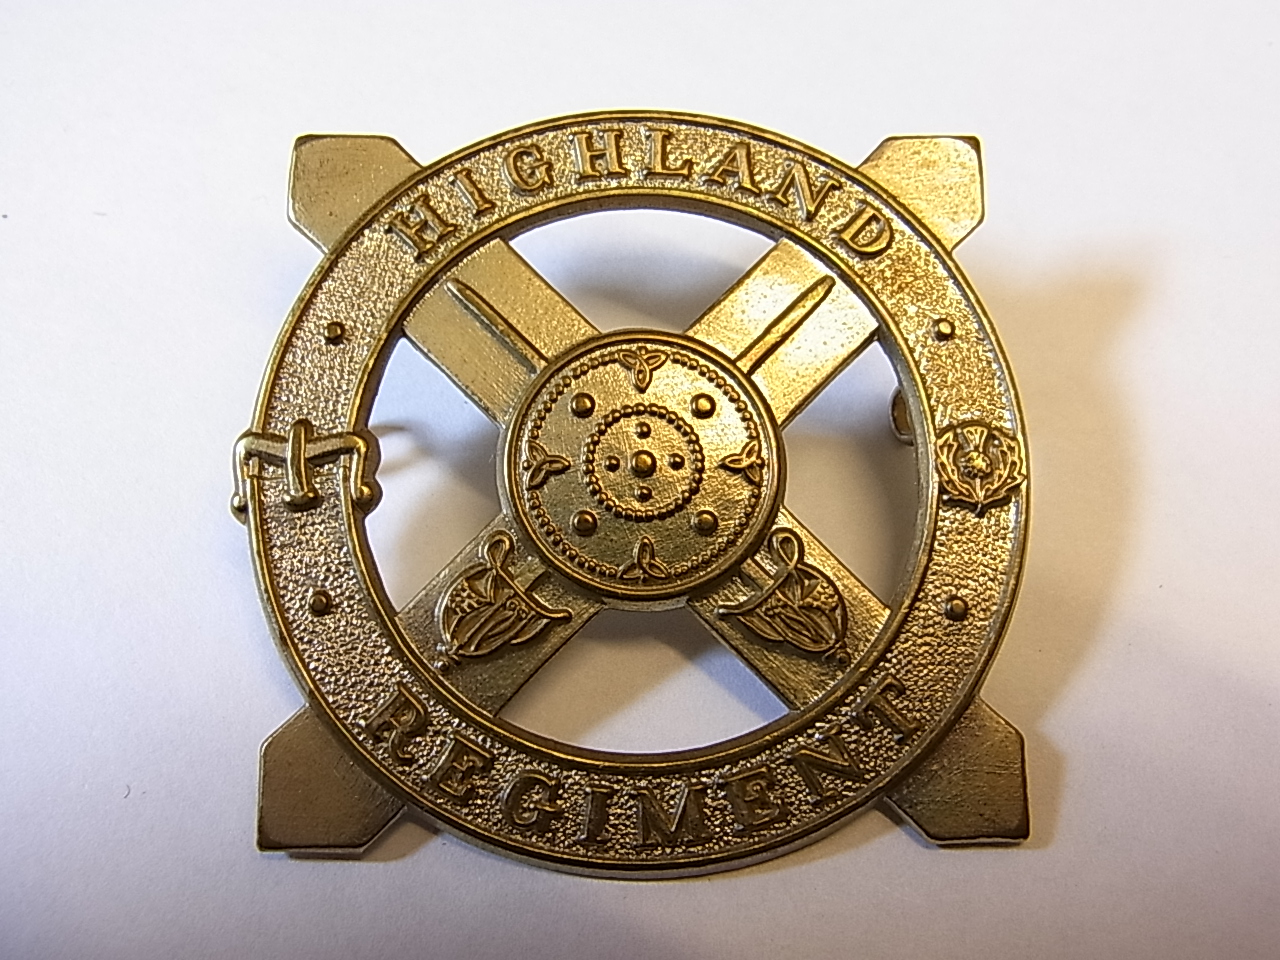 The Highland Regiment WWII Officers cap badge (White-Metal, lugs) K&K: 2265